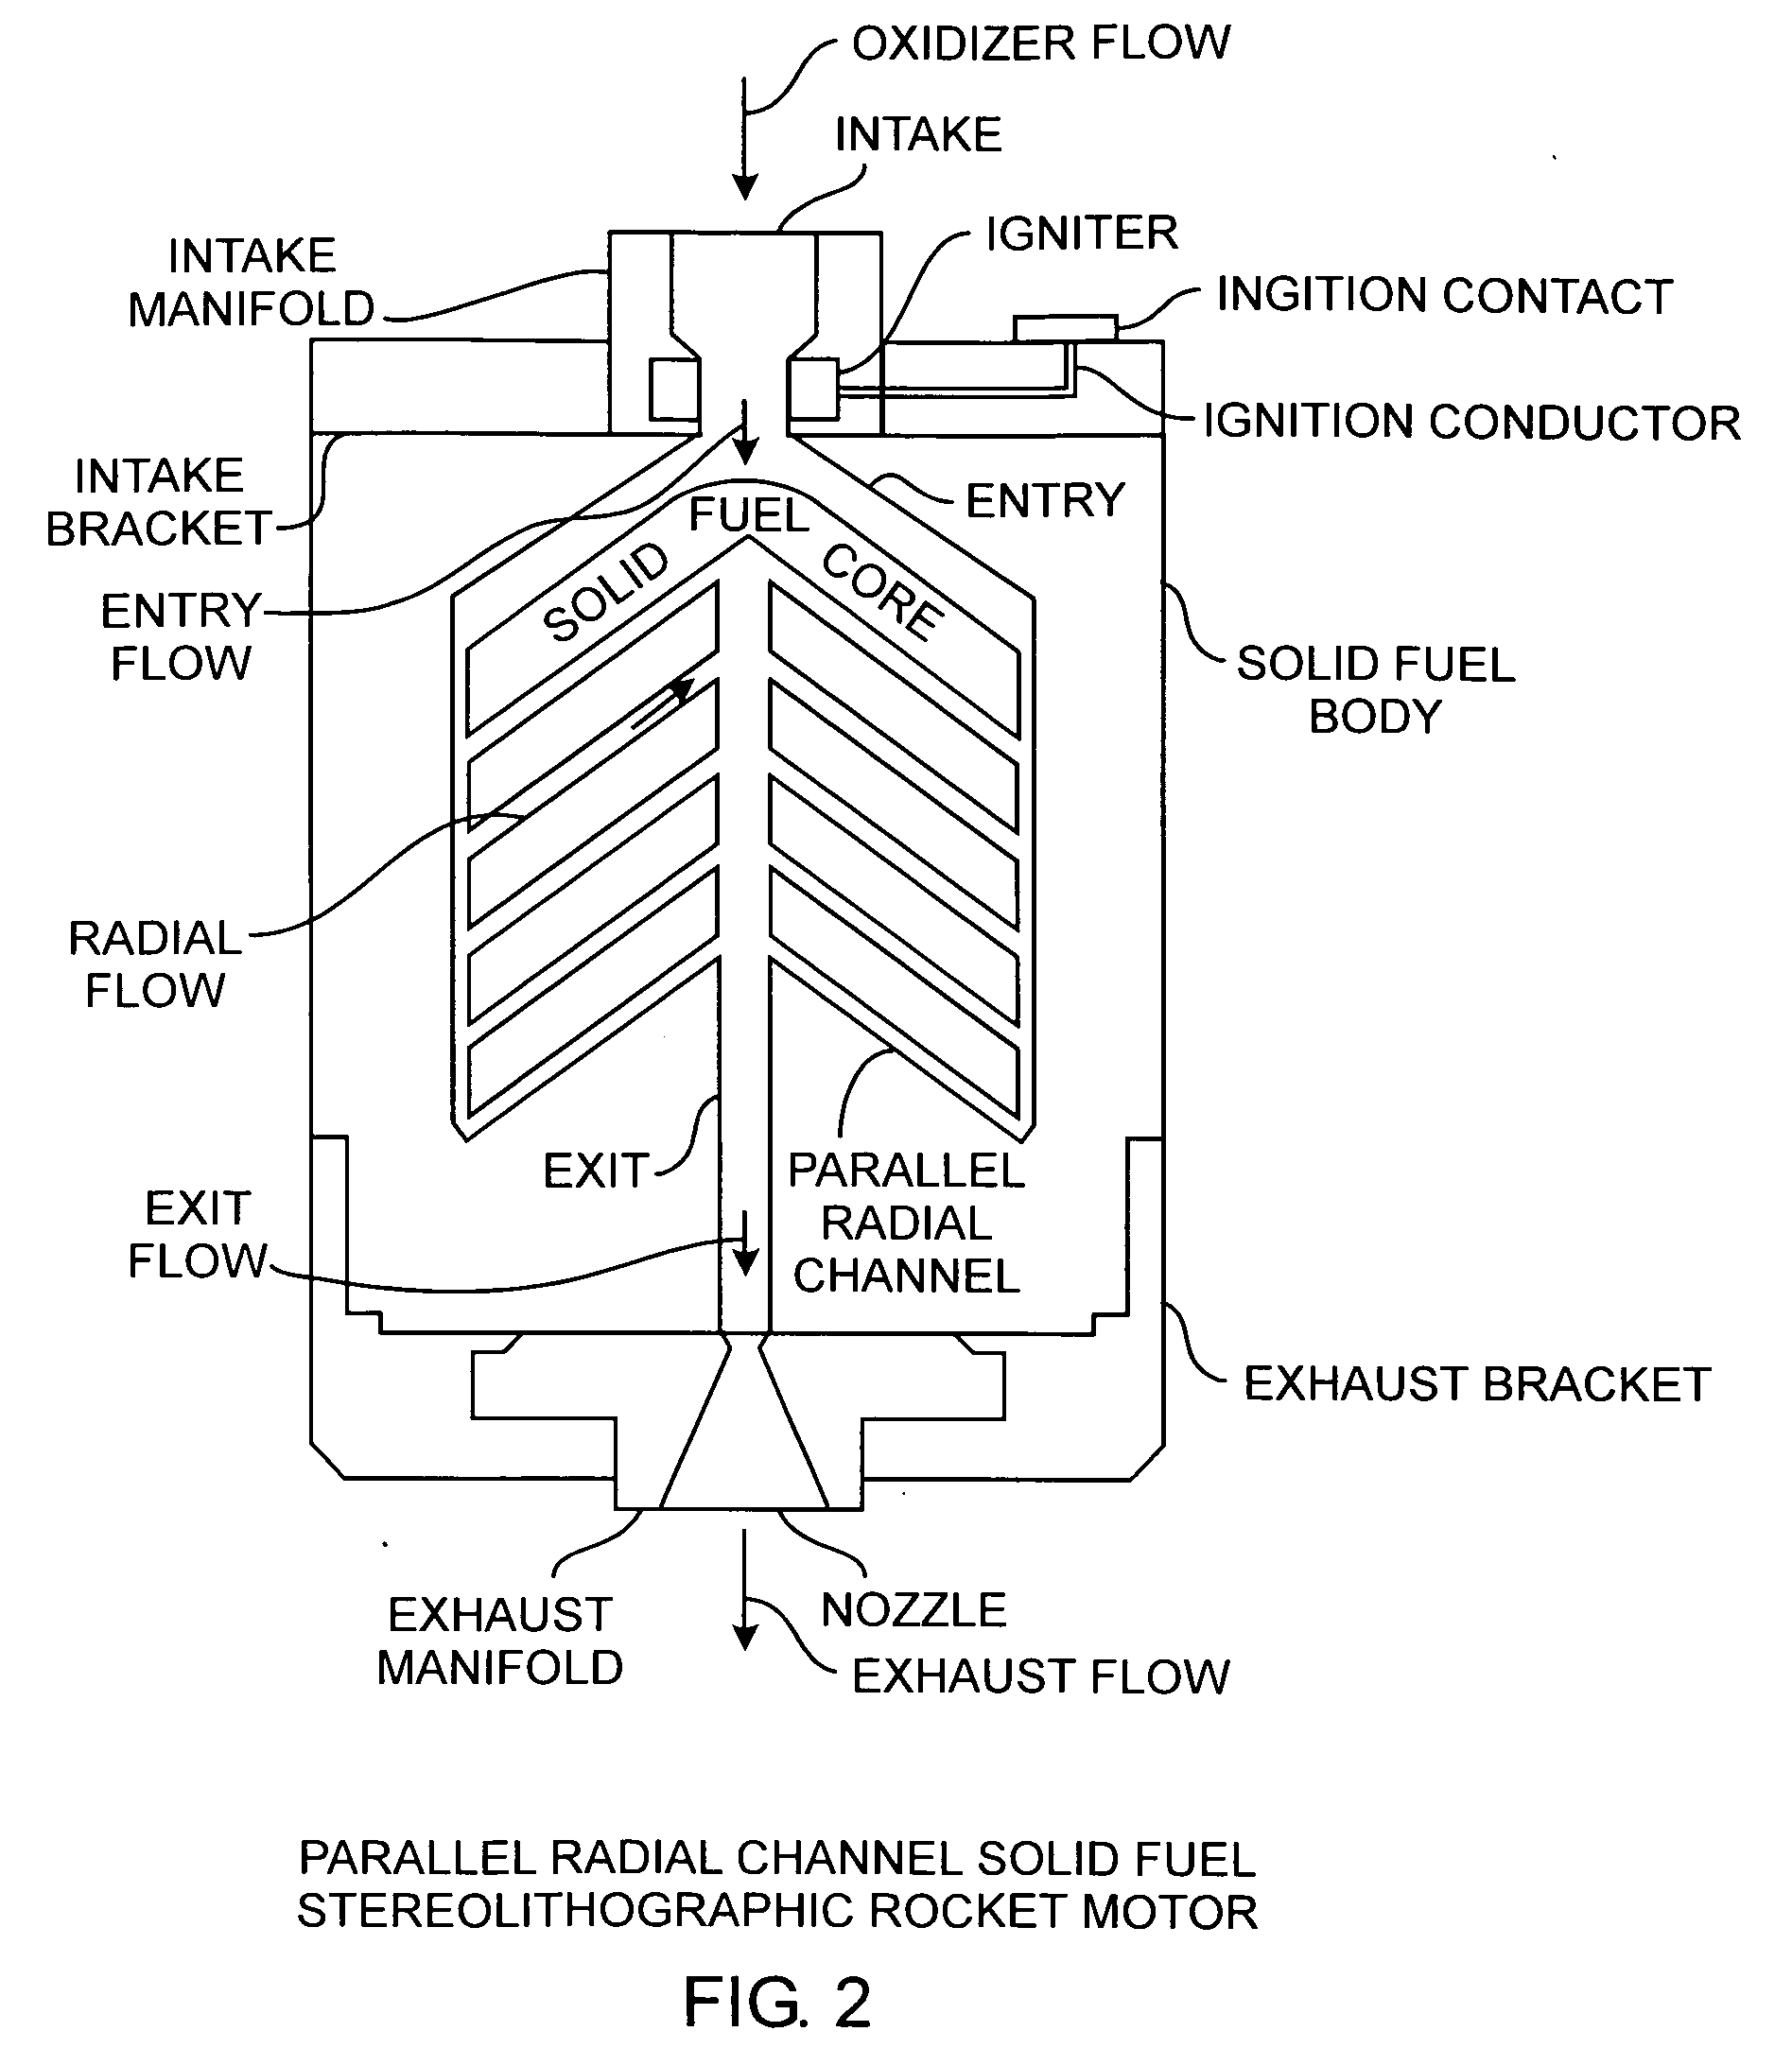 Buried radial flow stereolithographic rocket motor